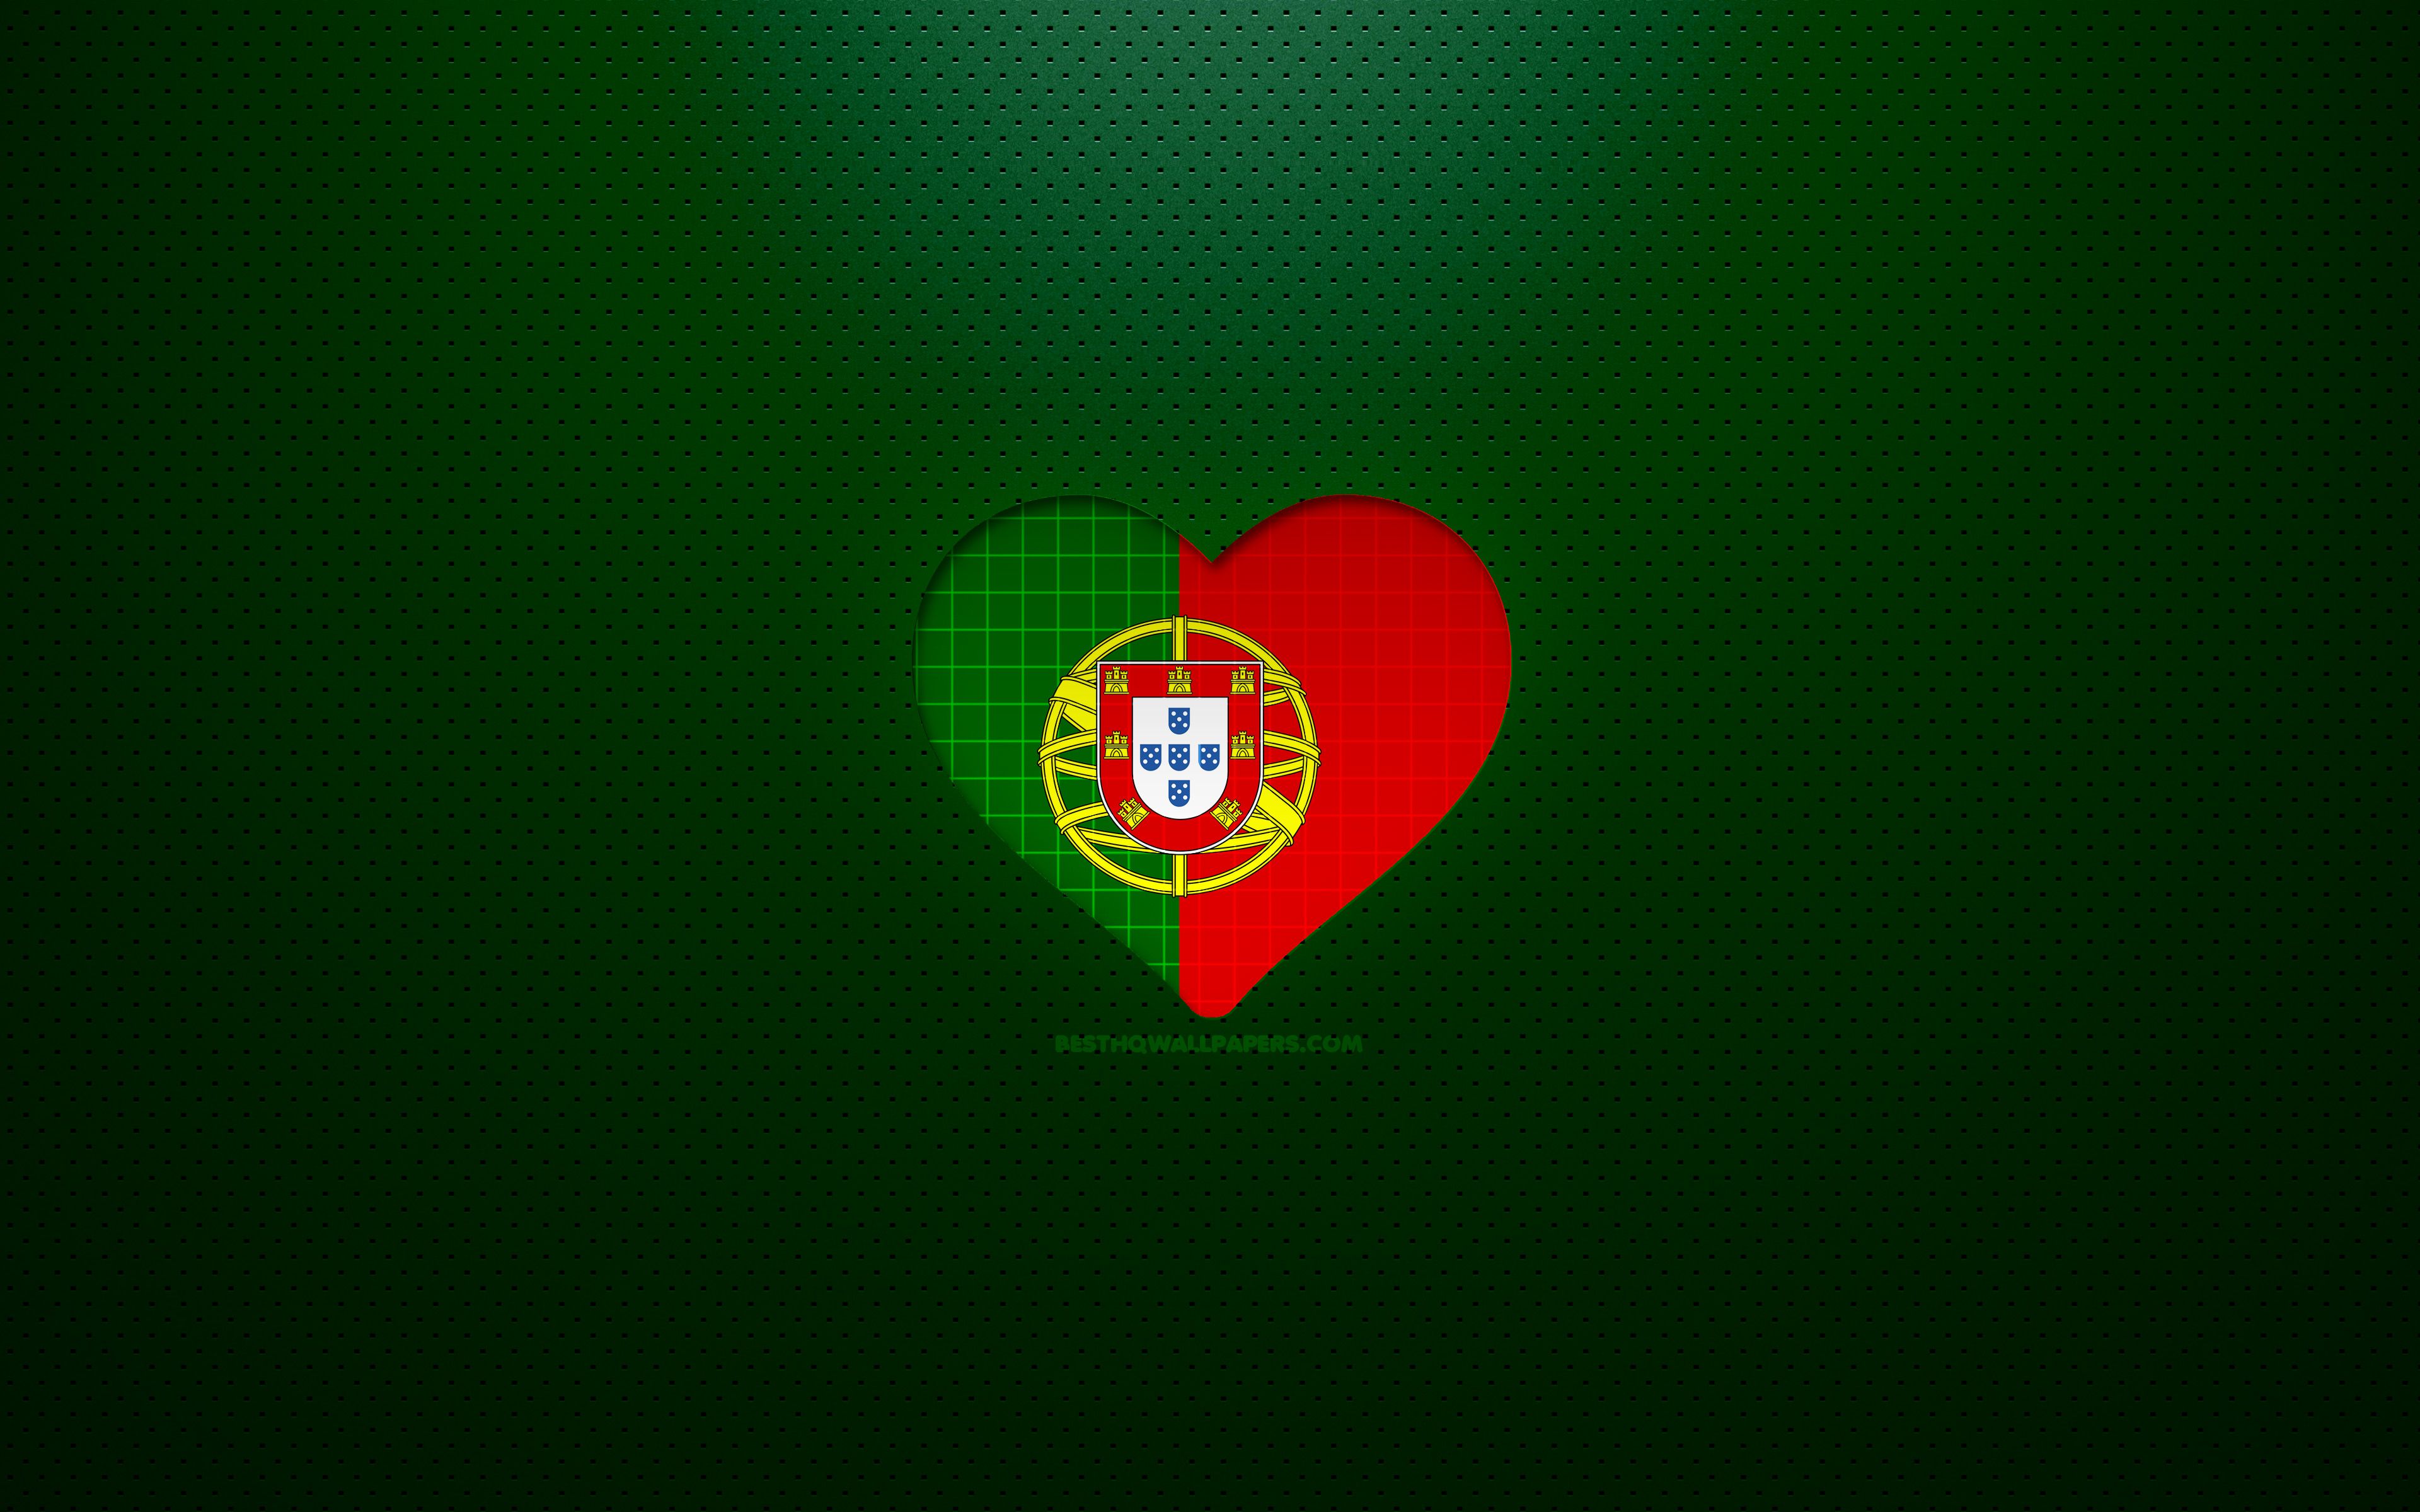 Download wallpaper I Love Portugal, 4k, Europe, green dotted background, Portuguese flag heart, Portugal, favorite countries, Love Portugal, Portuguese flag for desktop with resolution 3840x2400. High Quality HD picture wallpaper